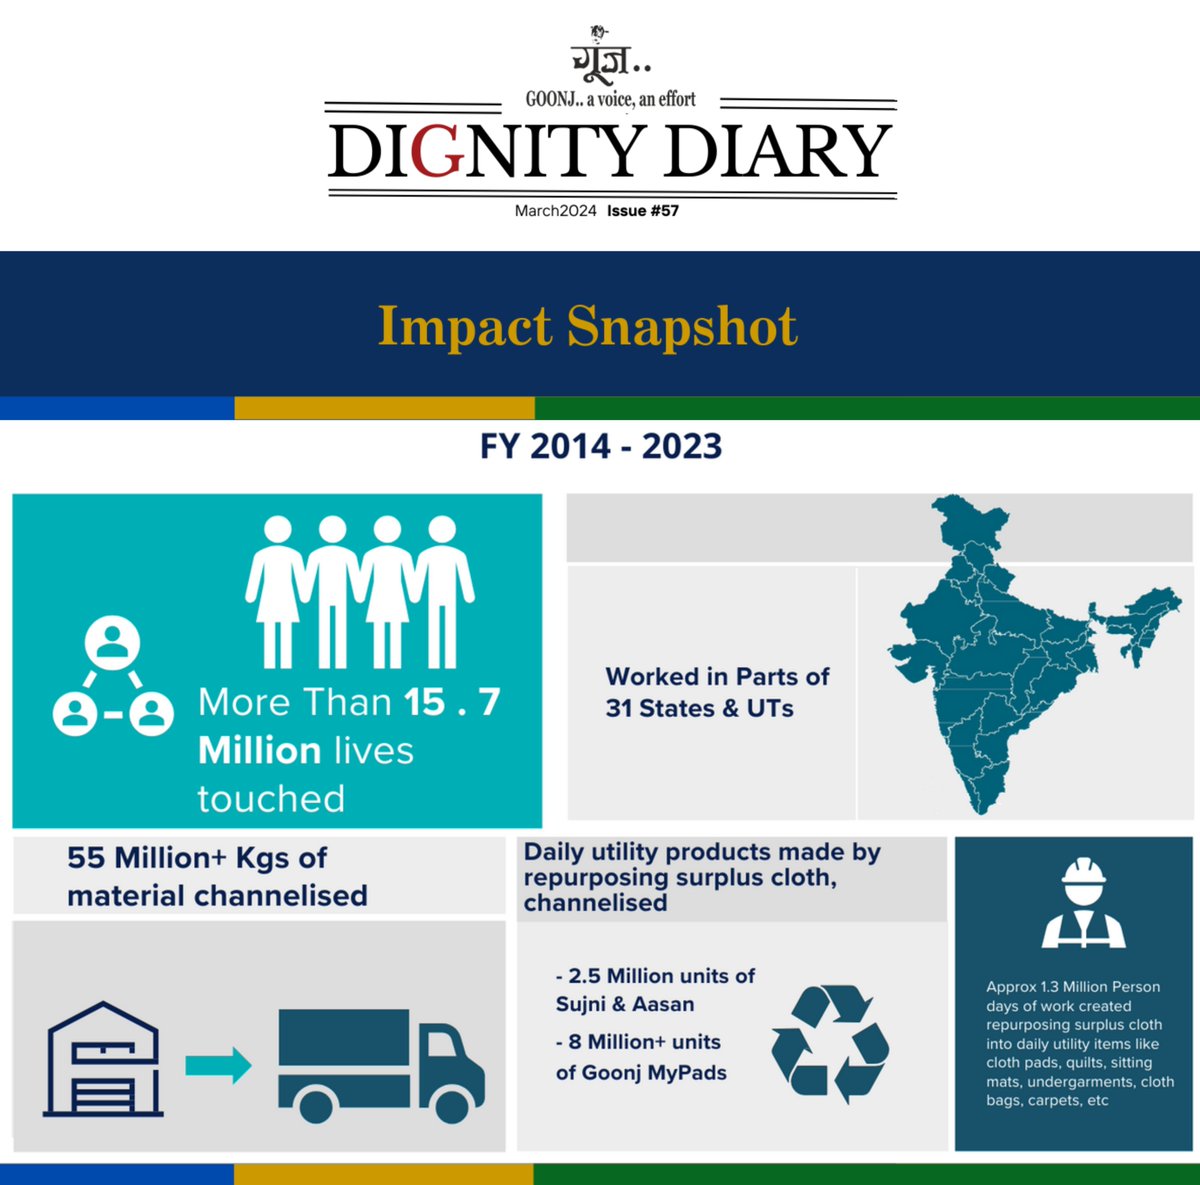 In the latest issue of Dignity Diary, we deep dive into the impact of Goonj’s work over the last nine years, along with other updates you don't want to miss. Click here to read - bit.ly/dignity-diary-… #Goonj #Goonjit #Goonj@25 #ClothDay #DignityDiary